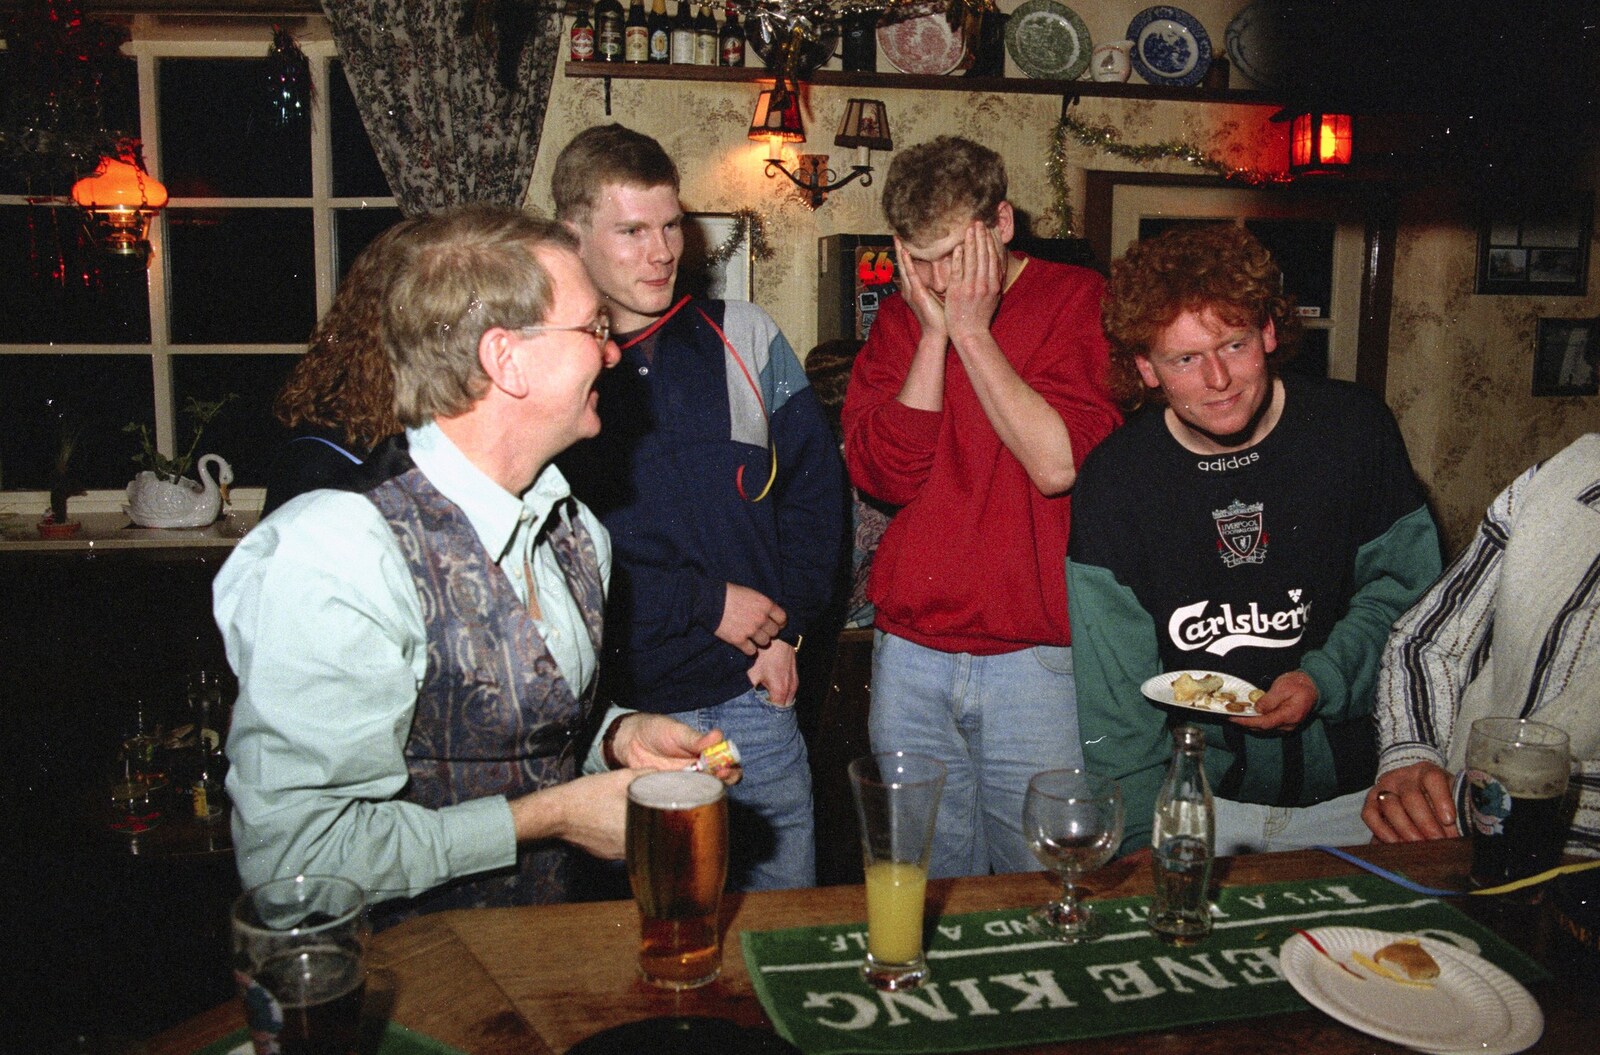 Bill's finding it all too much from New Year's Eve at the Swan Inn, Brome, Suffolk - 31st December 1994